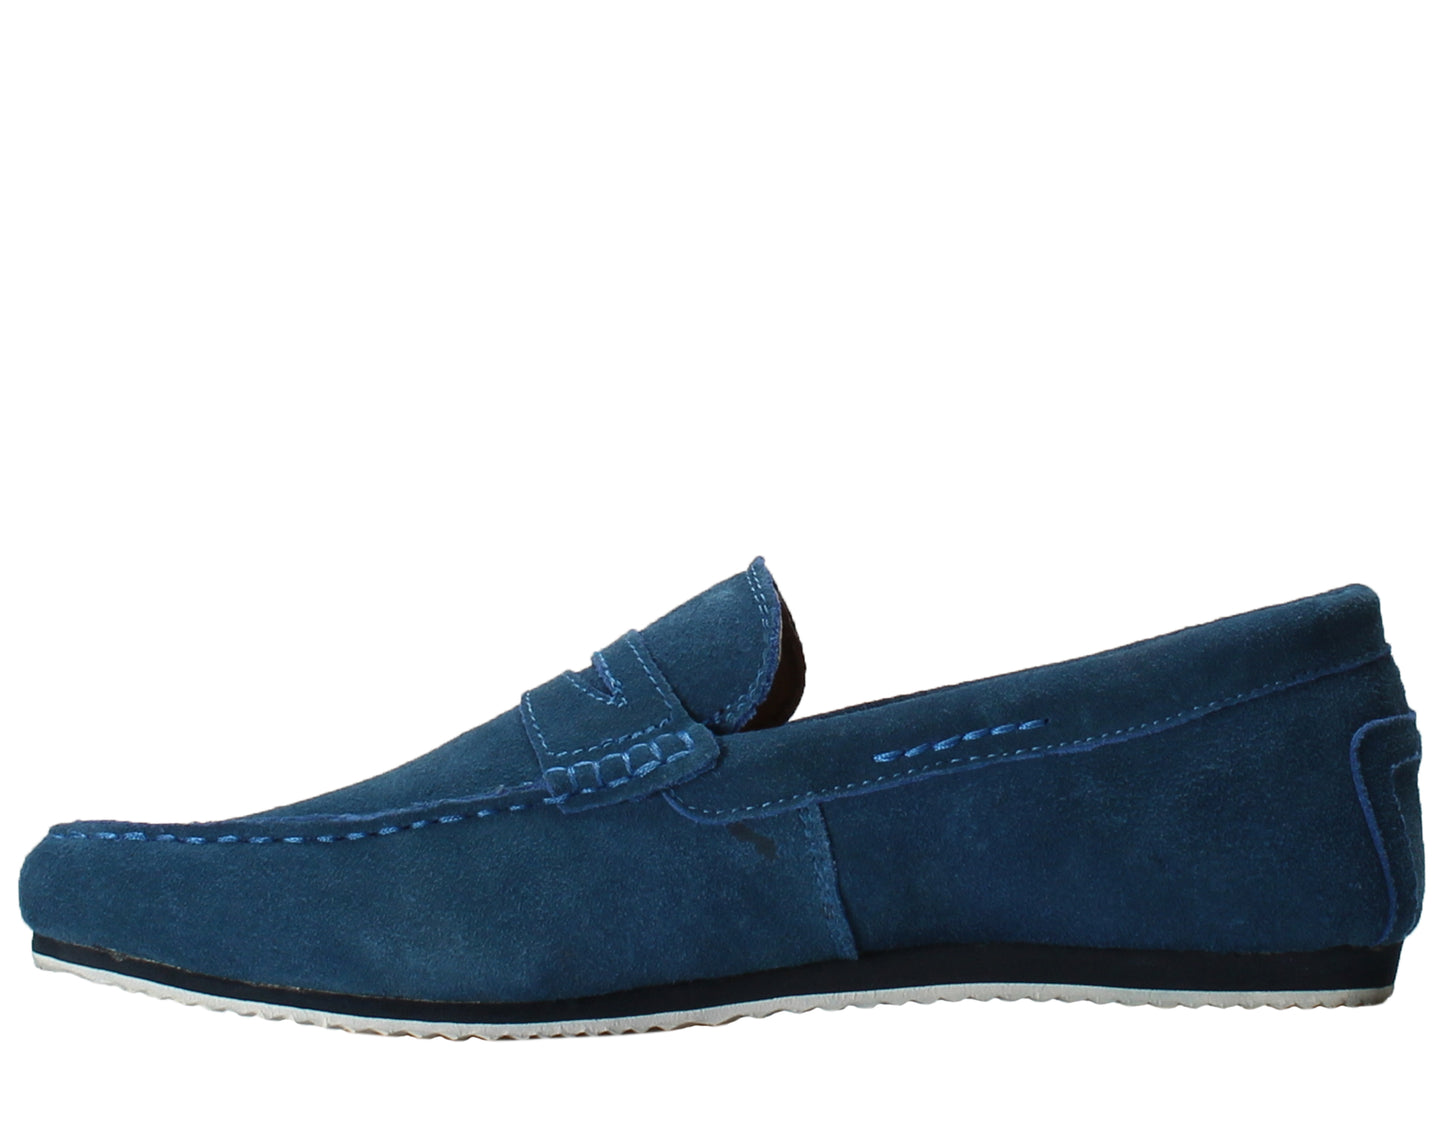 Howling Wolf Milan Penny Loafer Men's Shoes